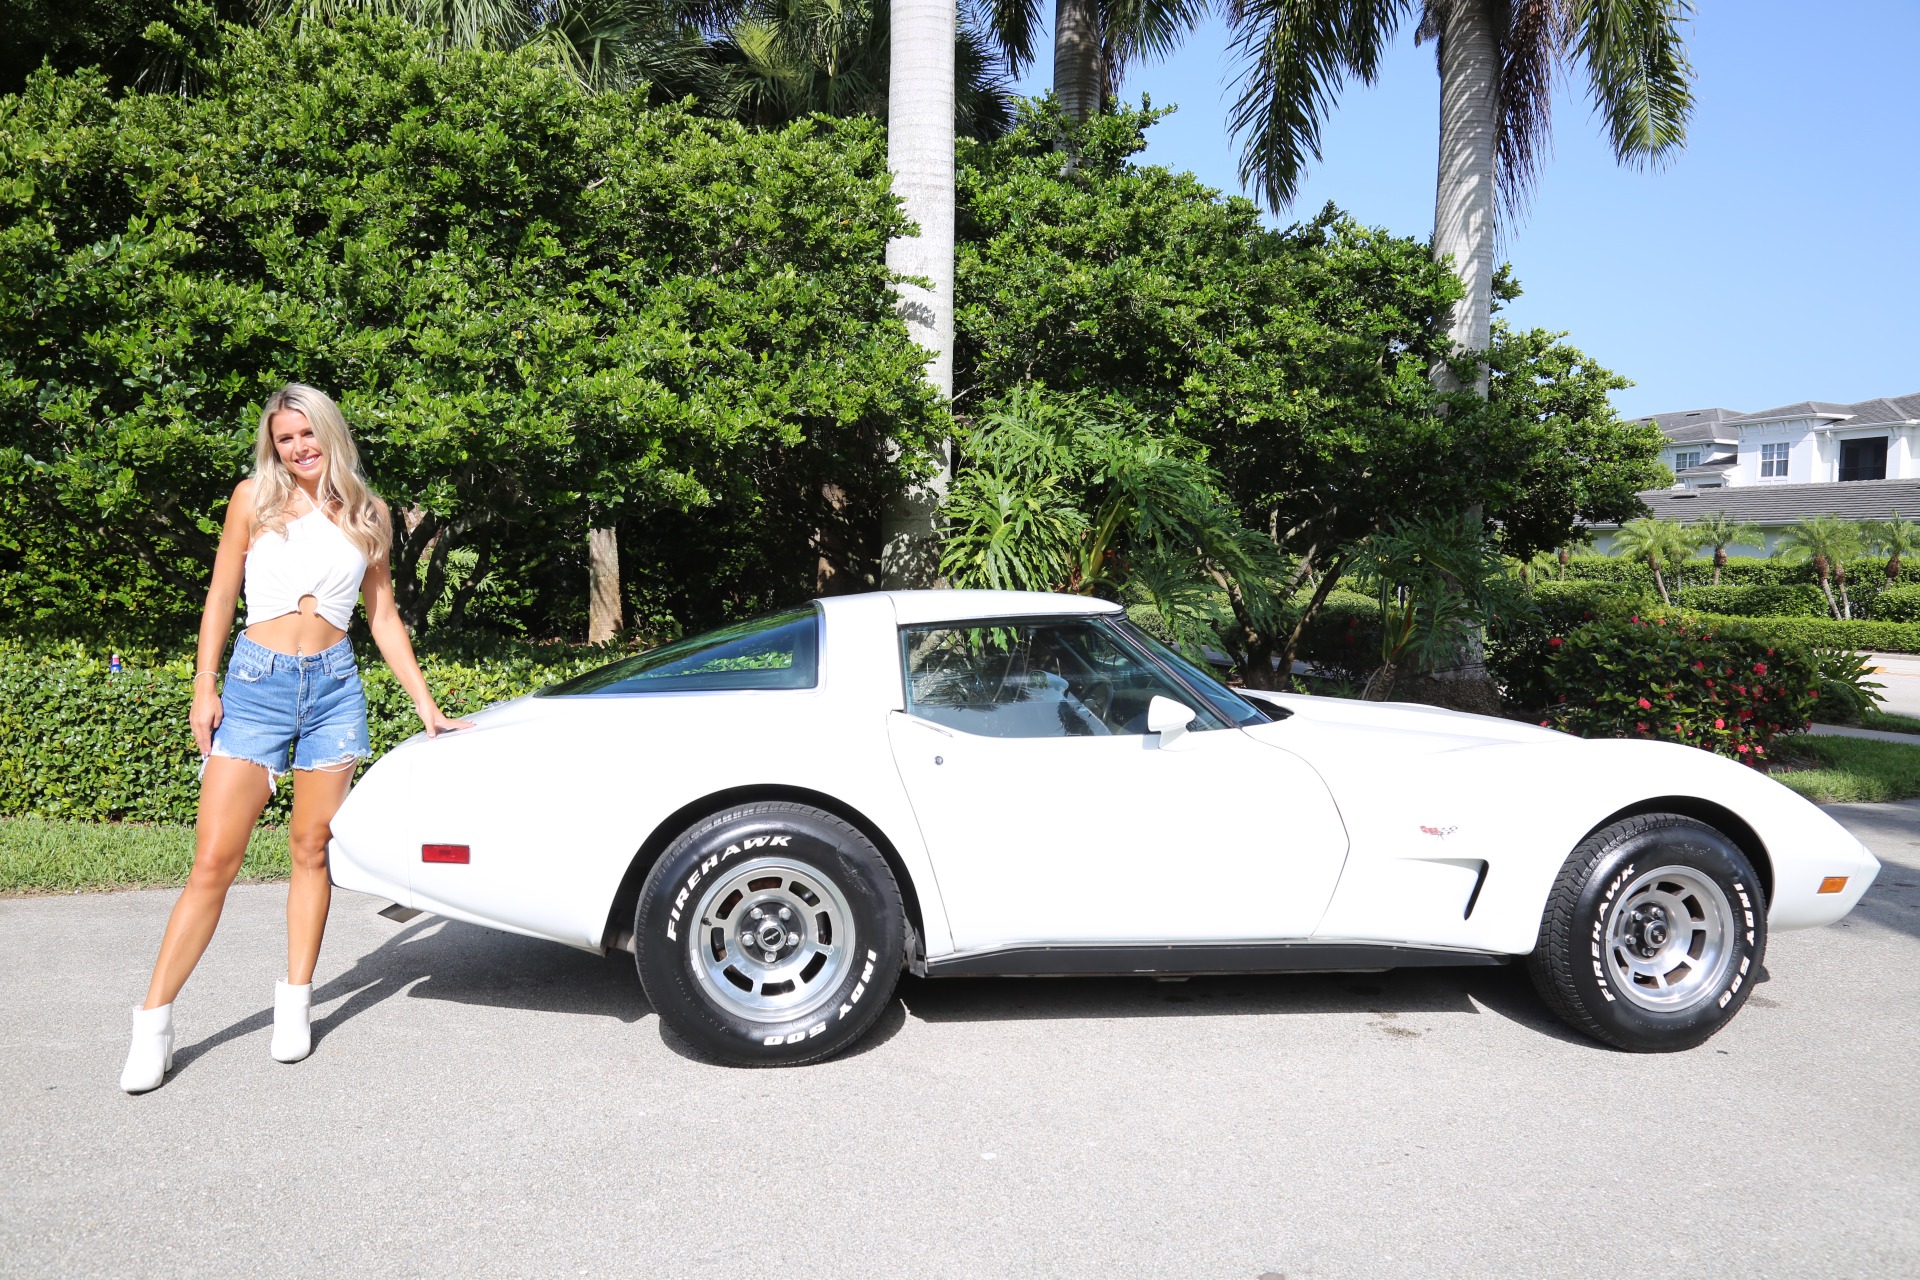 Used 1978 Chevrolet Corvette Anniversary Edition for sale Sold at Muscle Cars for Sale Inc. in Fort Myers FL 33912 3